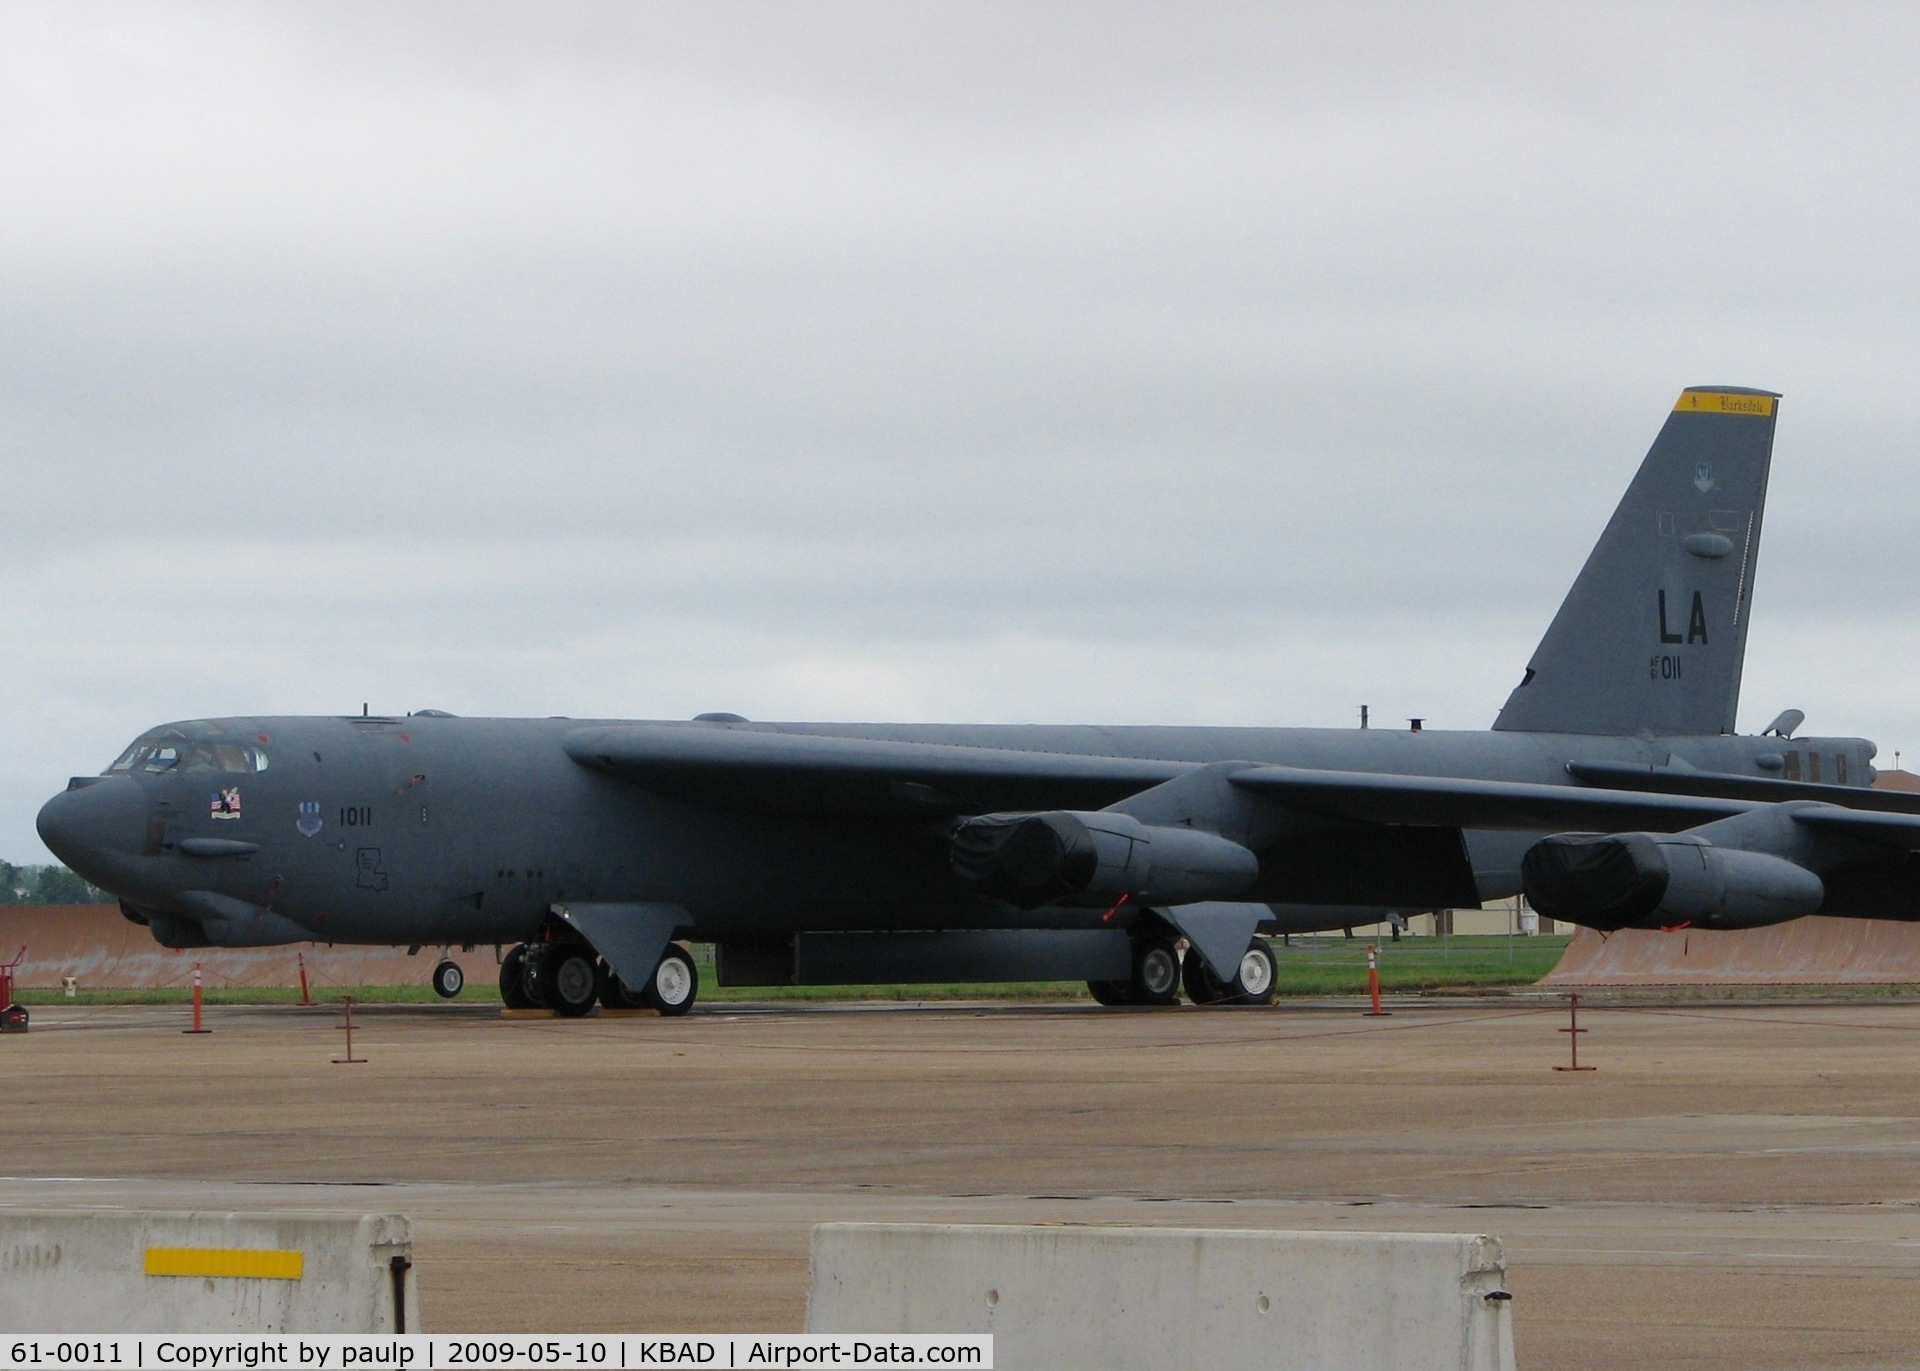 61-0011, 1961 Boeing B-52H Stratofortress C/N 464438, At Barksdale Air Force Base. Different paint on the tail.